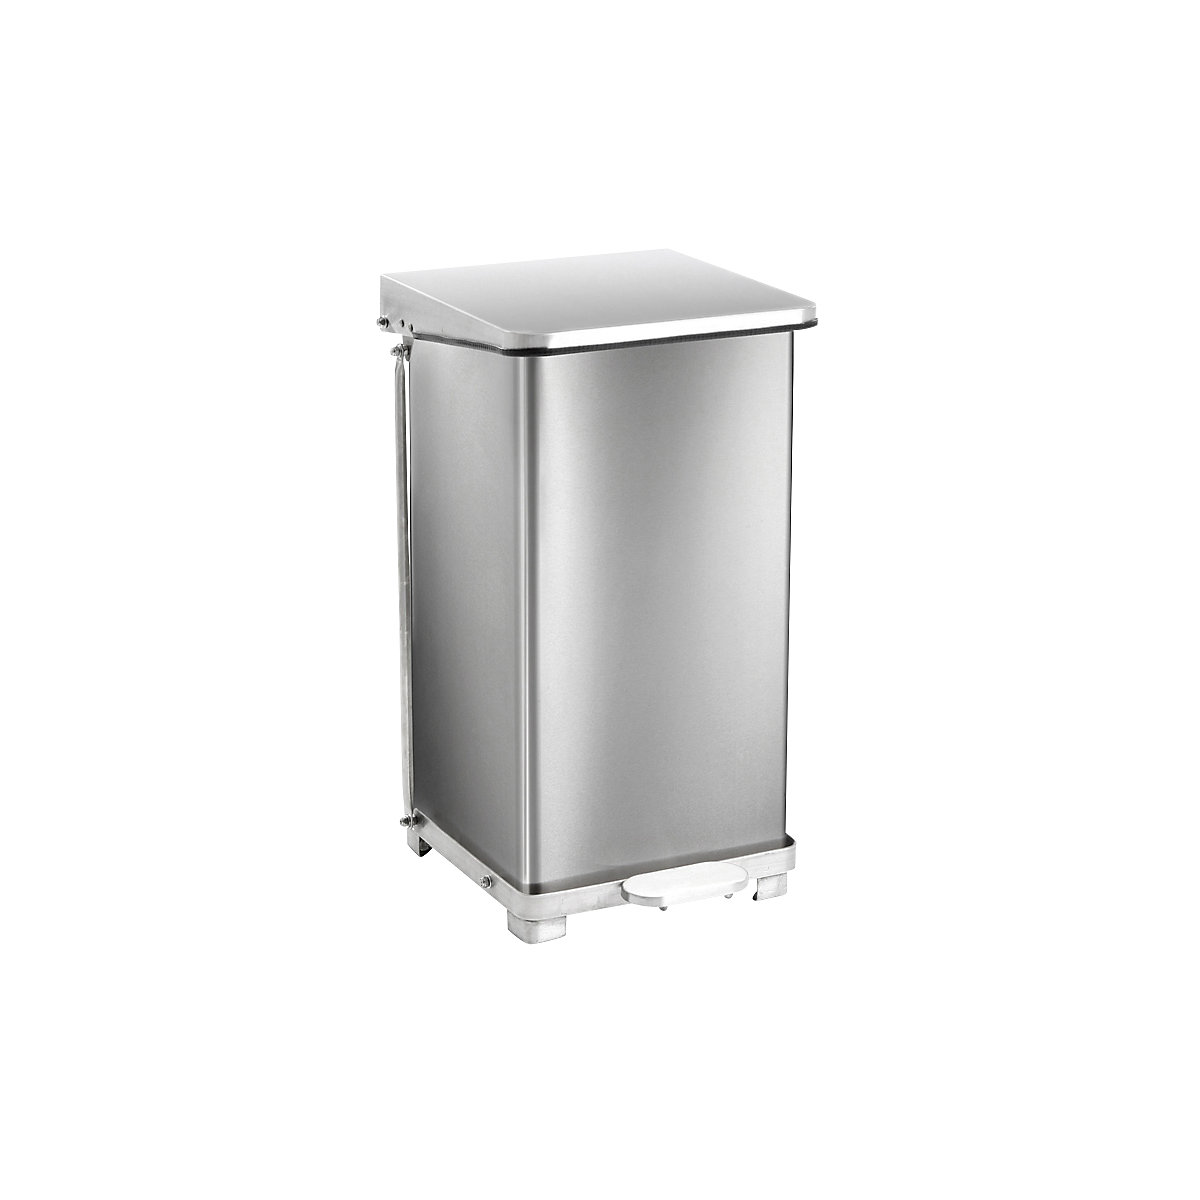 Industrial pedal bin, stainless steel, capacity 45 l, HxWxD 595 x 380 x 365 mm